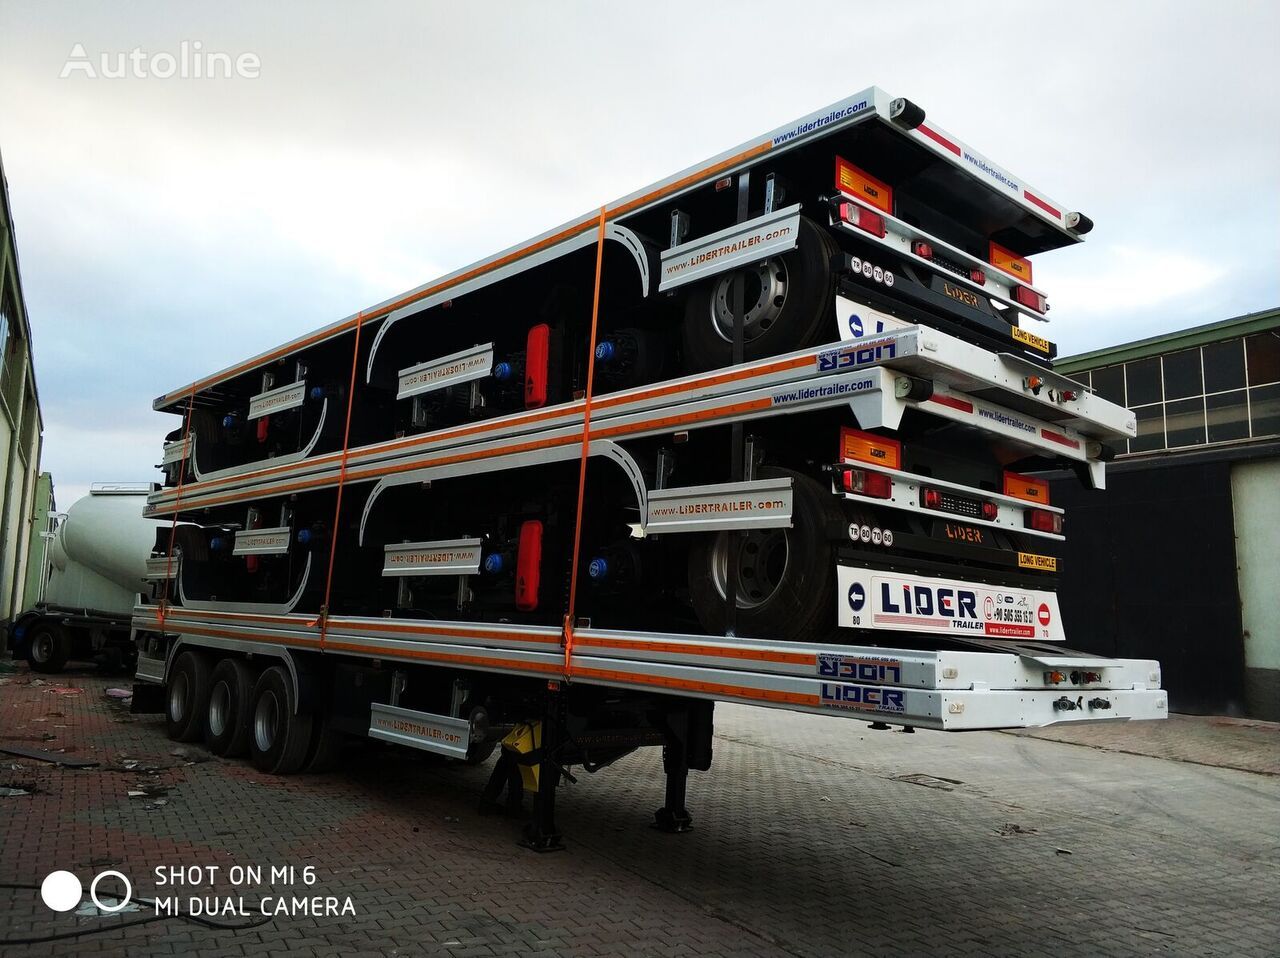 LIDER NEW 2023 MODELS YEAR (MANUFACTURER COMPANY LIDER TRAILER lizingą LIDER NEW 2023 MODELS YEAR (MANUFACTURER COMPANY LIDER TRAILER: foto 1